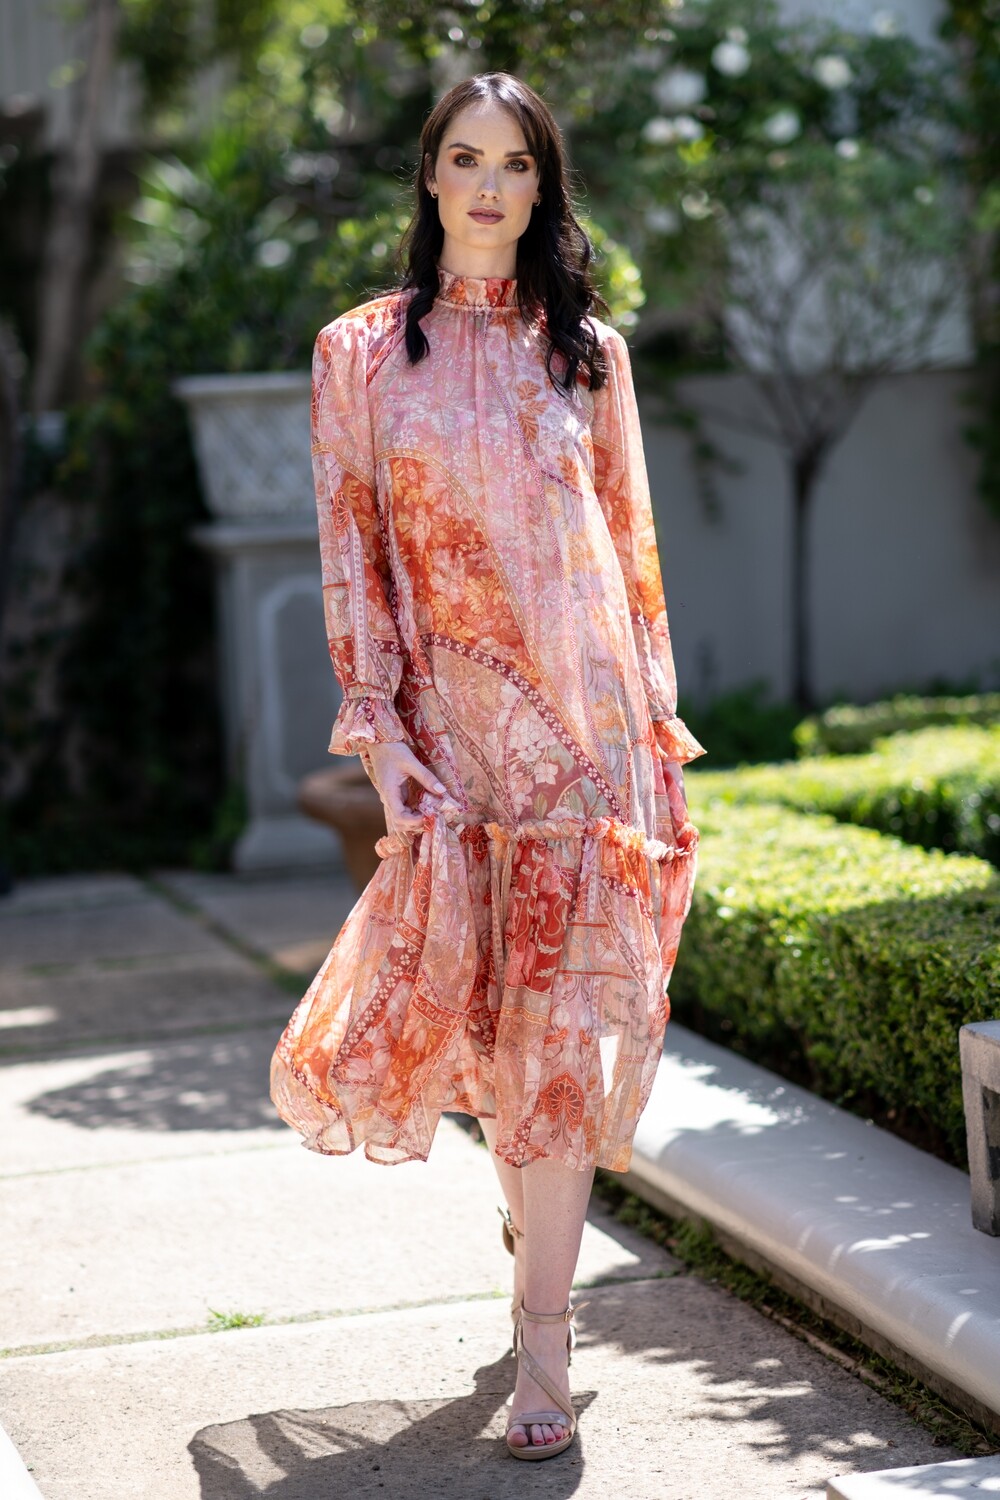 Mastik Orange Chiffon Flowing Floral Dress with ruffled Sleeve and collar with Belt and  matching underdress